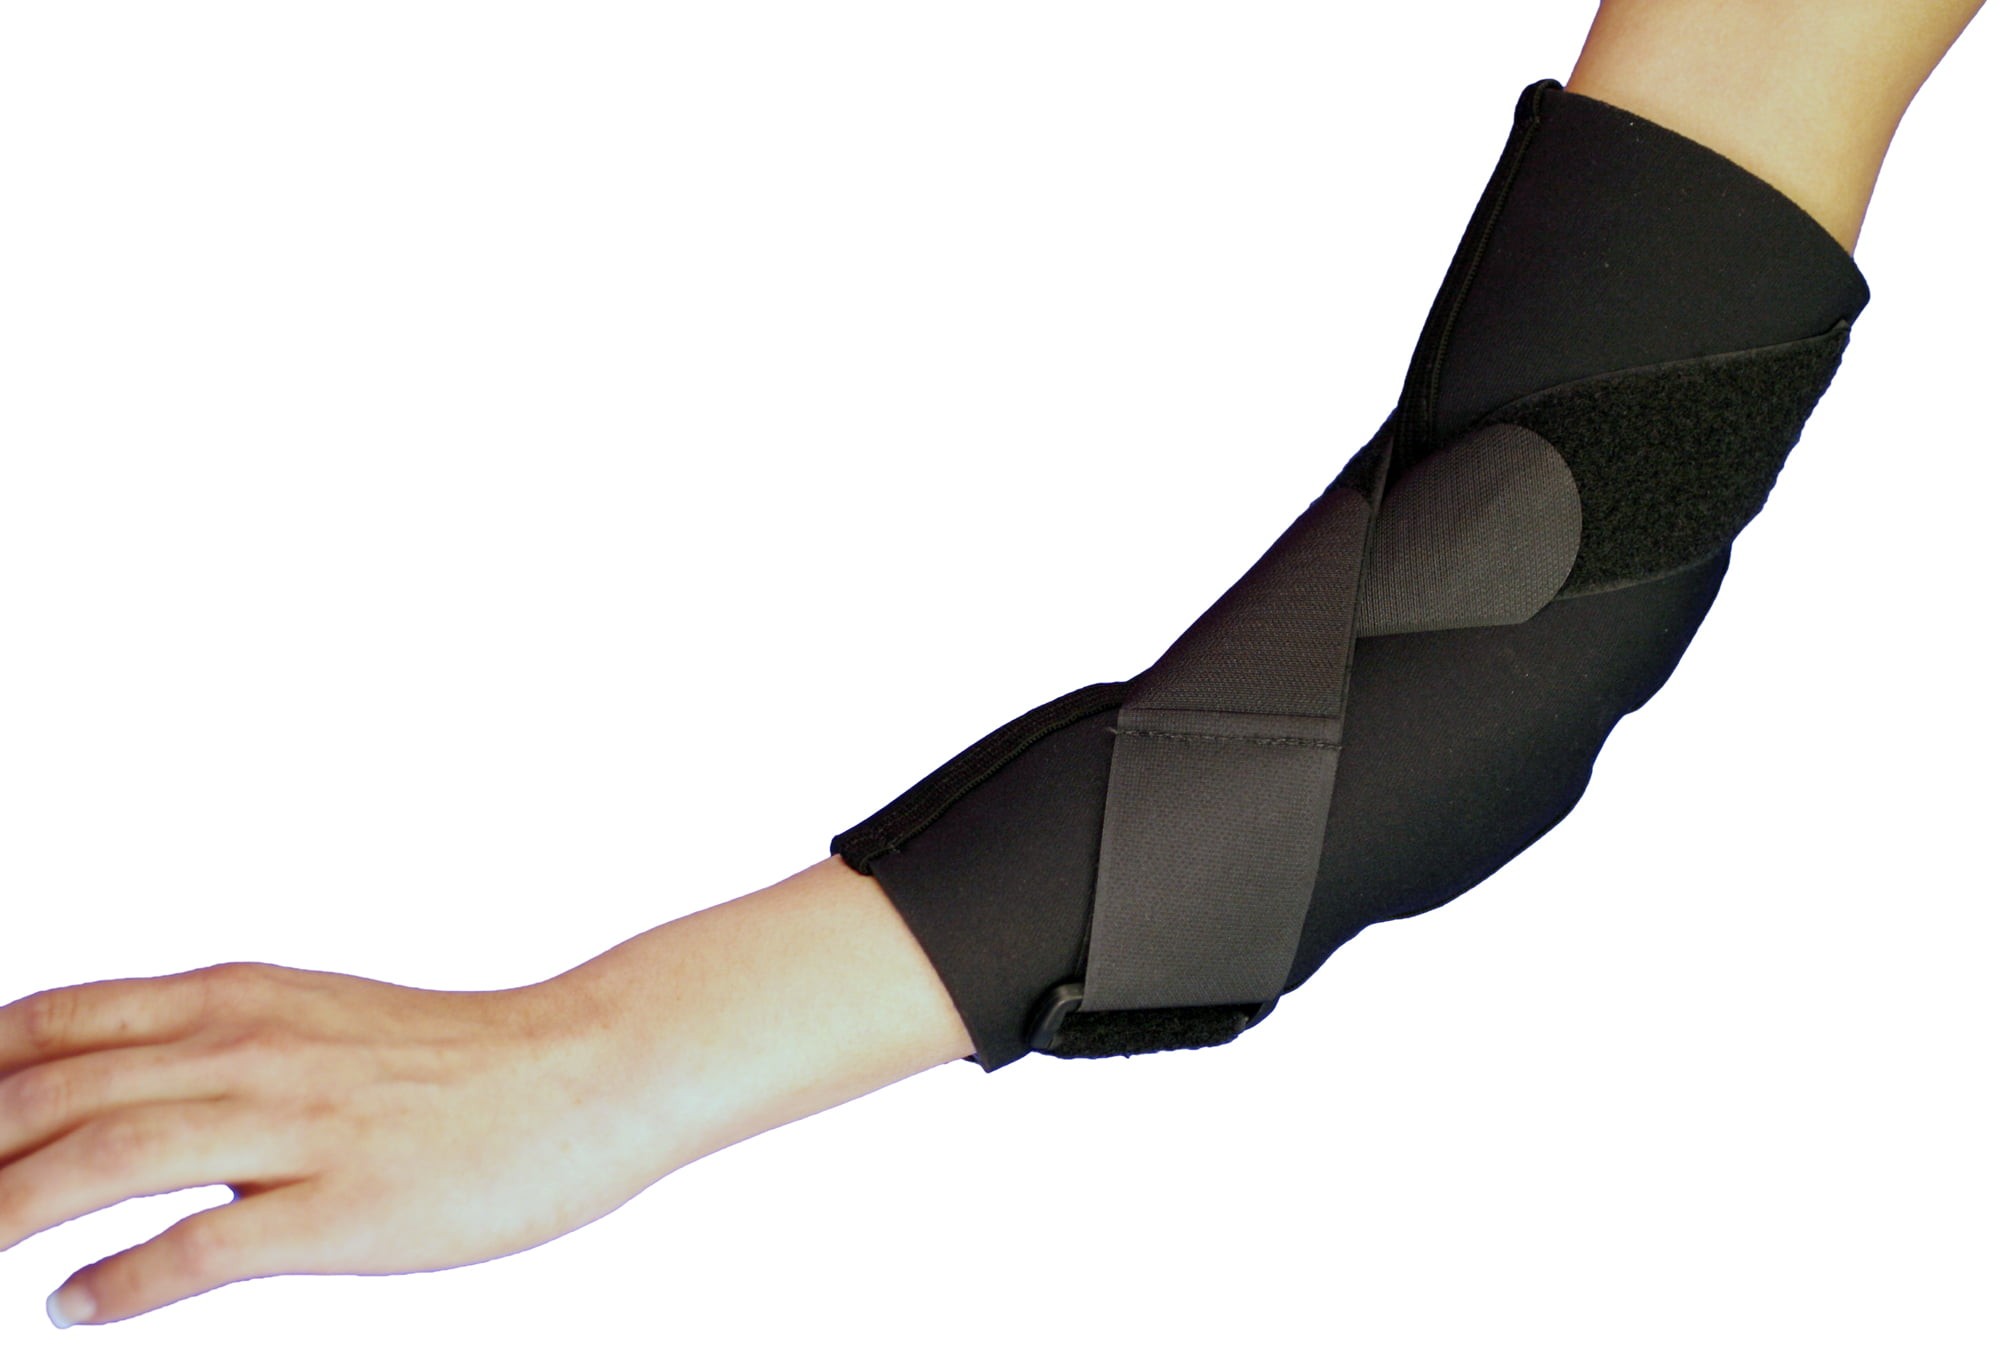 How To Tape For Elbow Hyperextension